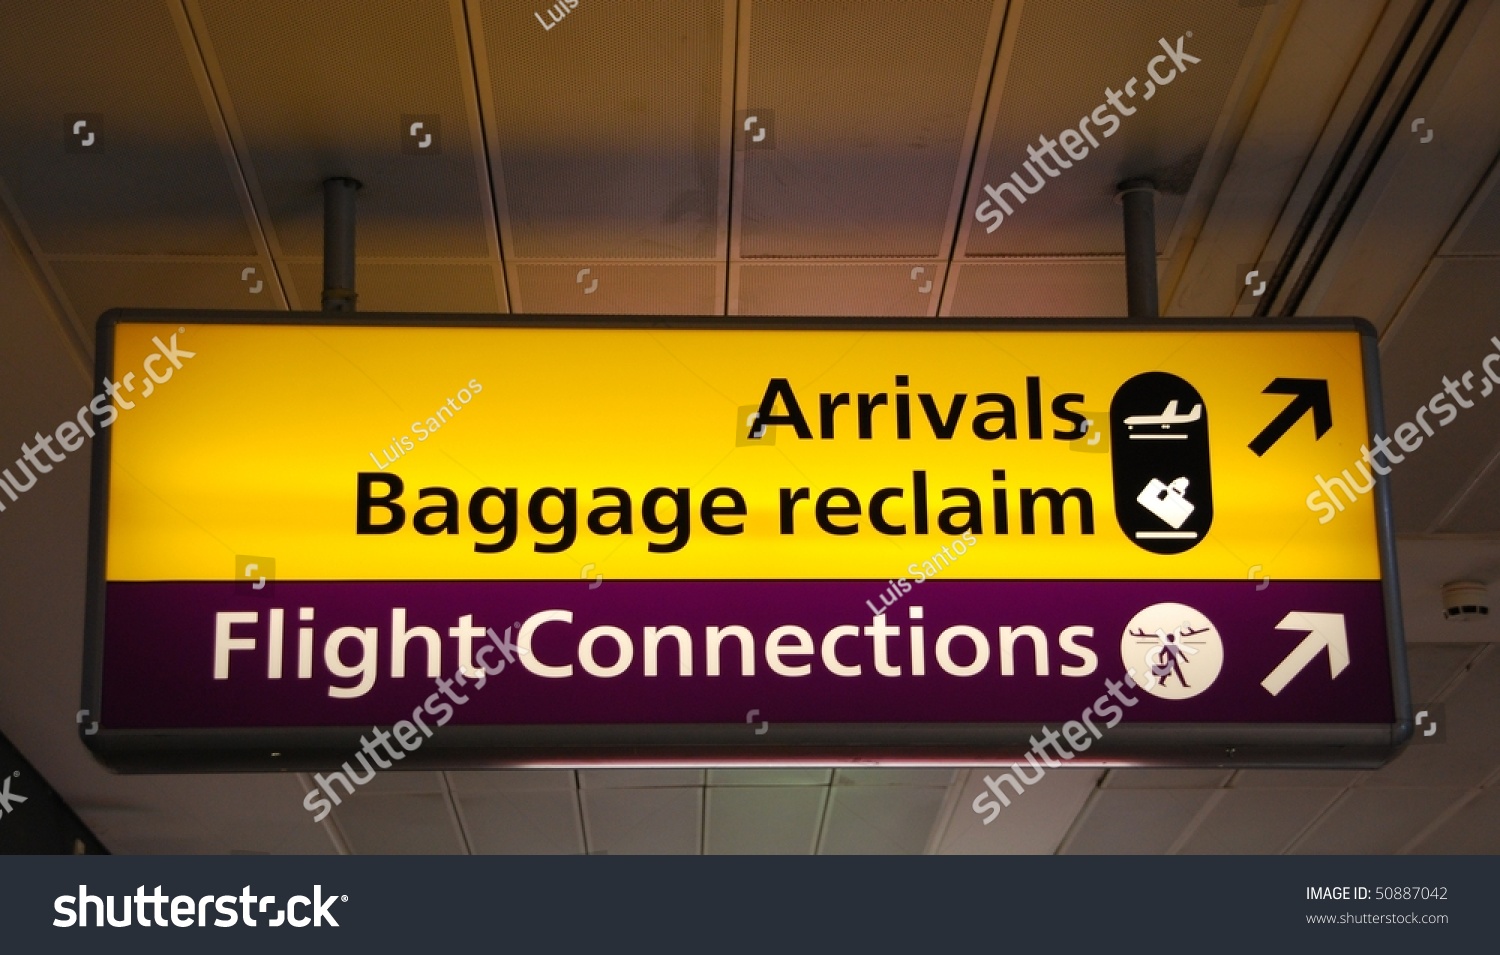 Yellow Arrivalsbaggage Claim Puprle Flight Connections Stock Photo 50887042 - Shutterstock1500 x 955